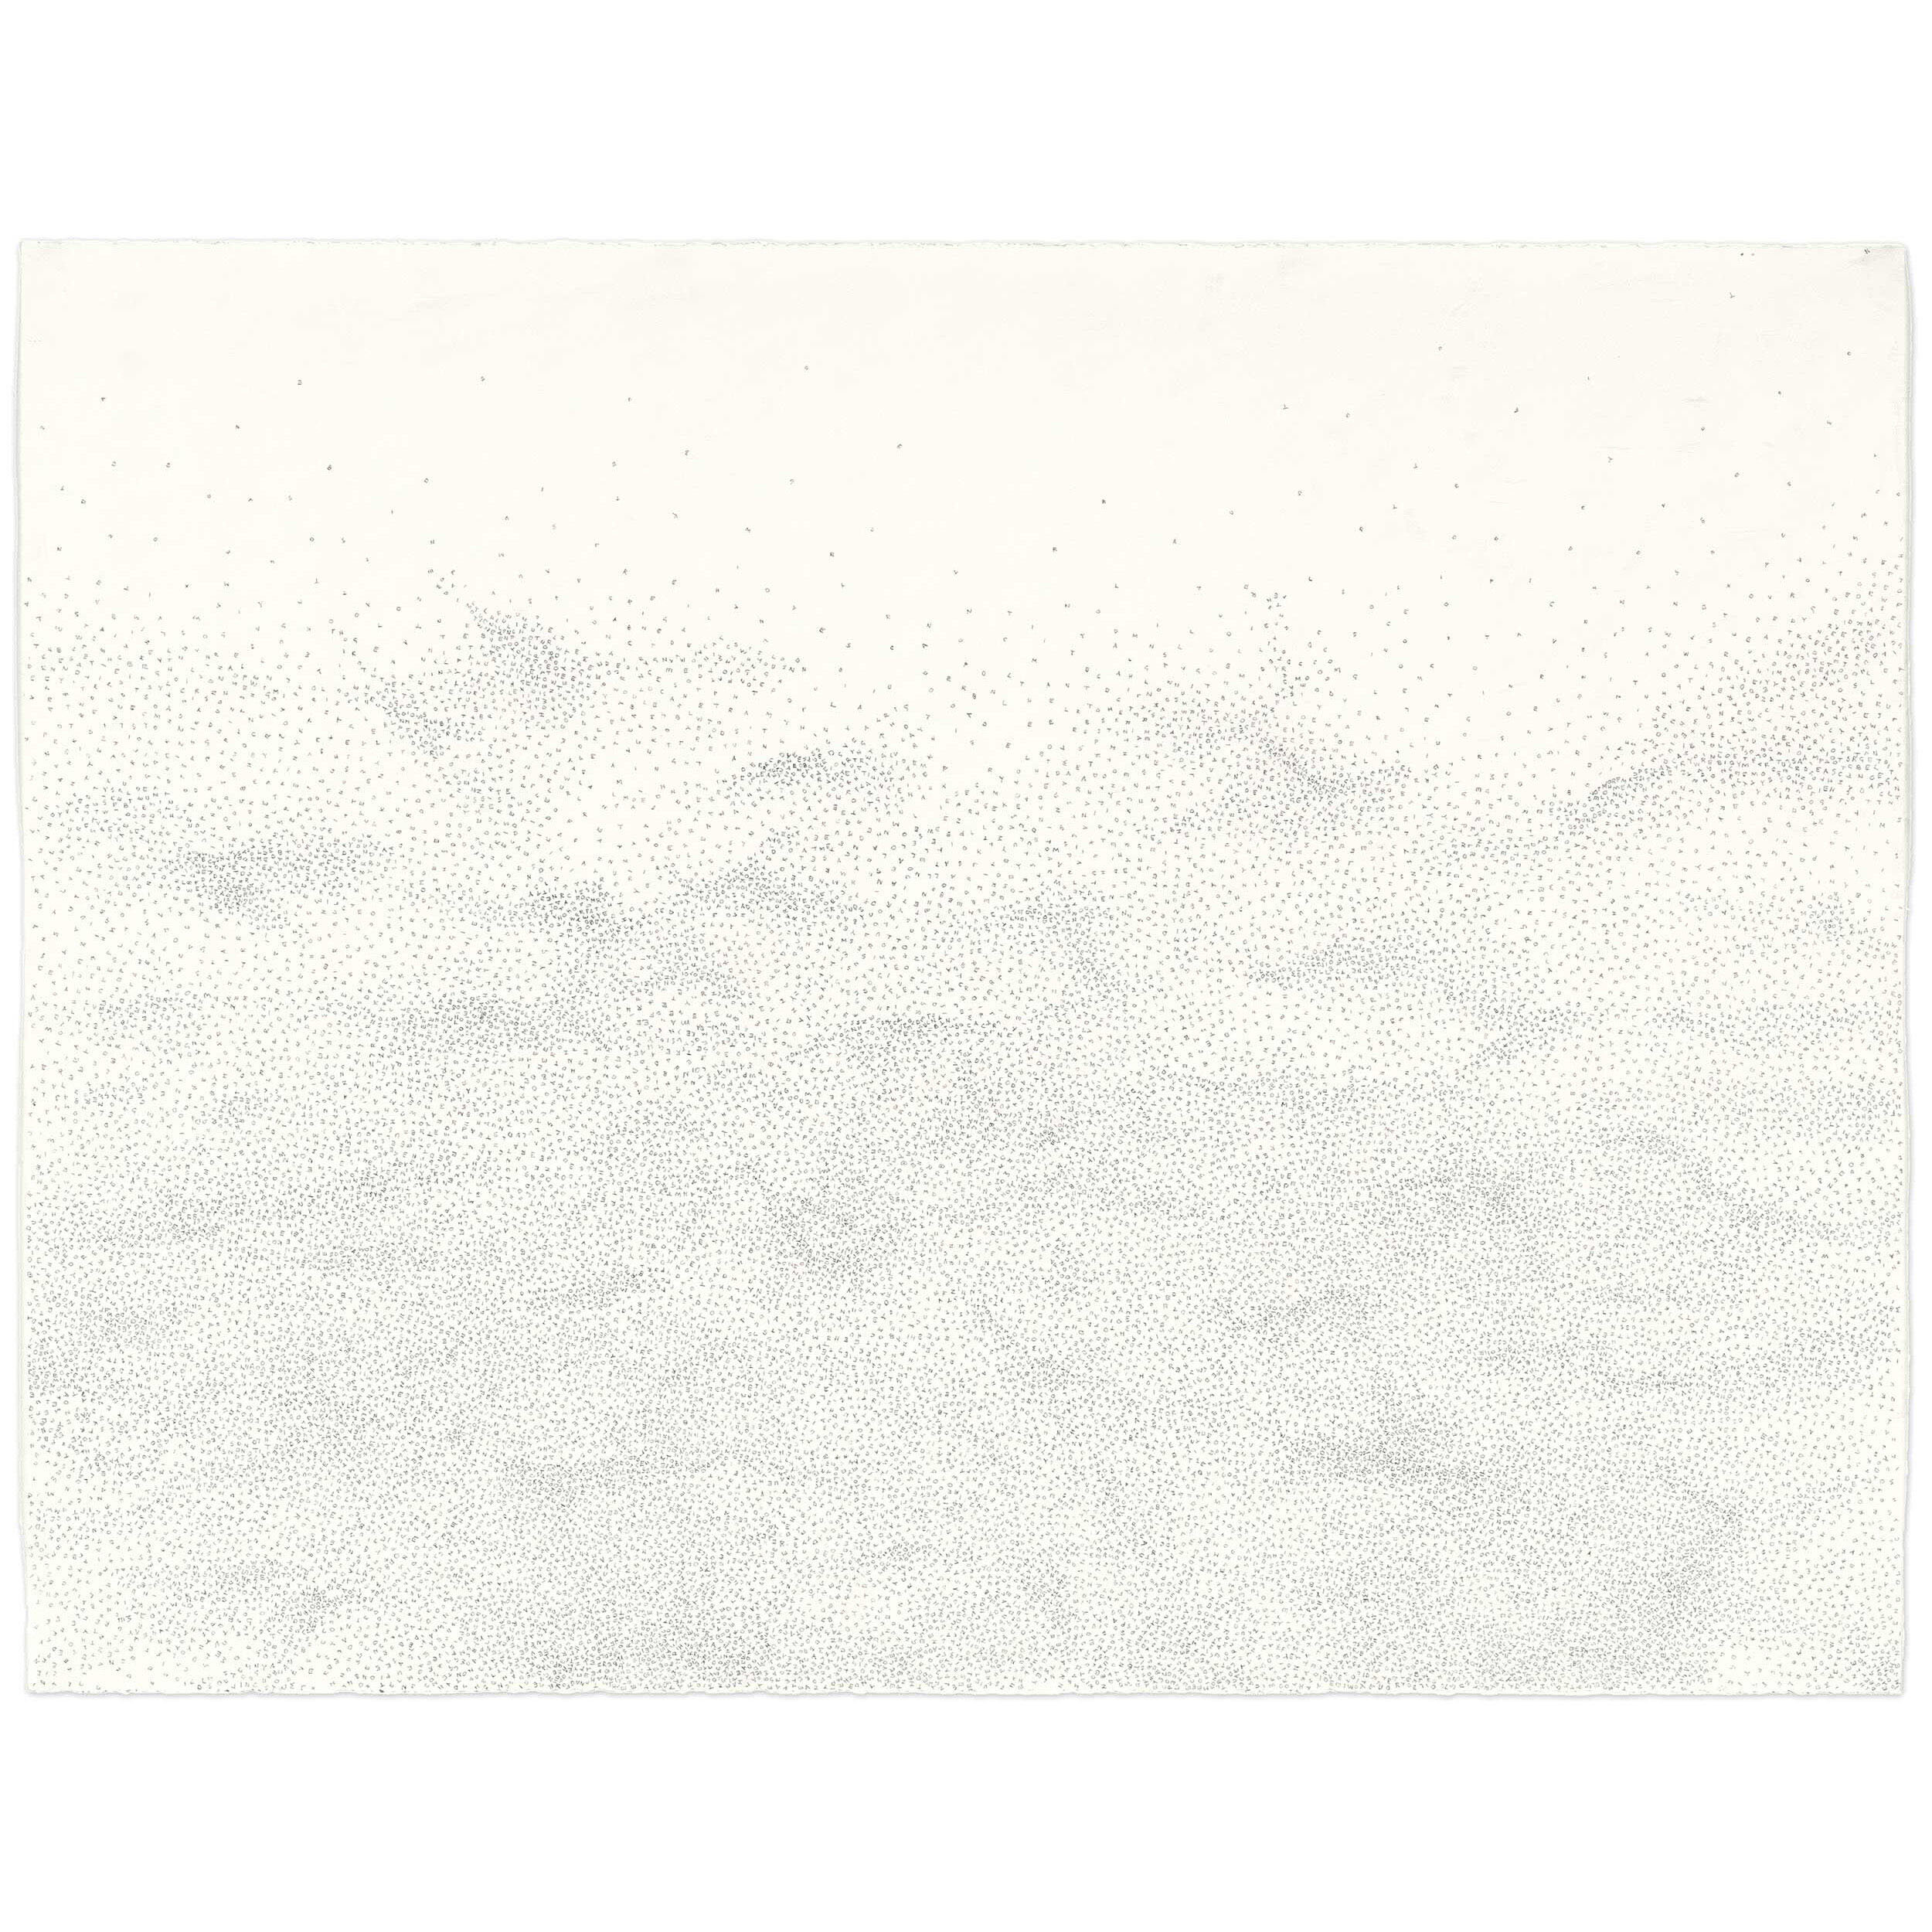   Forgetting  2007 Graphite on paper   38½” x 50” 